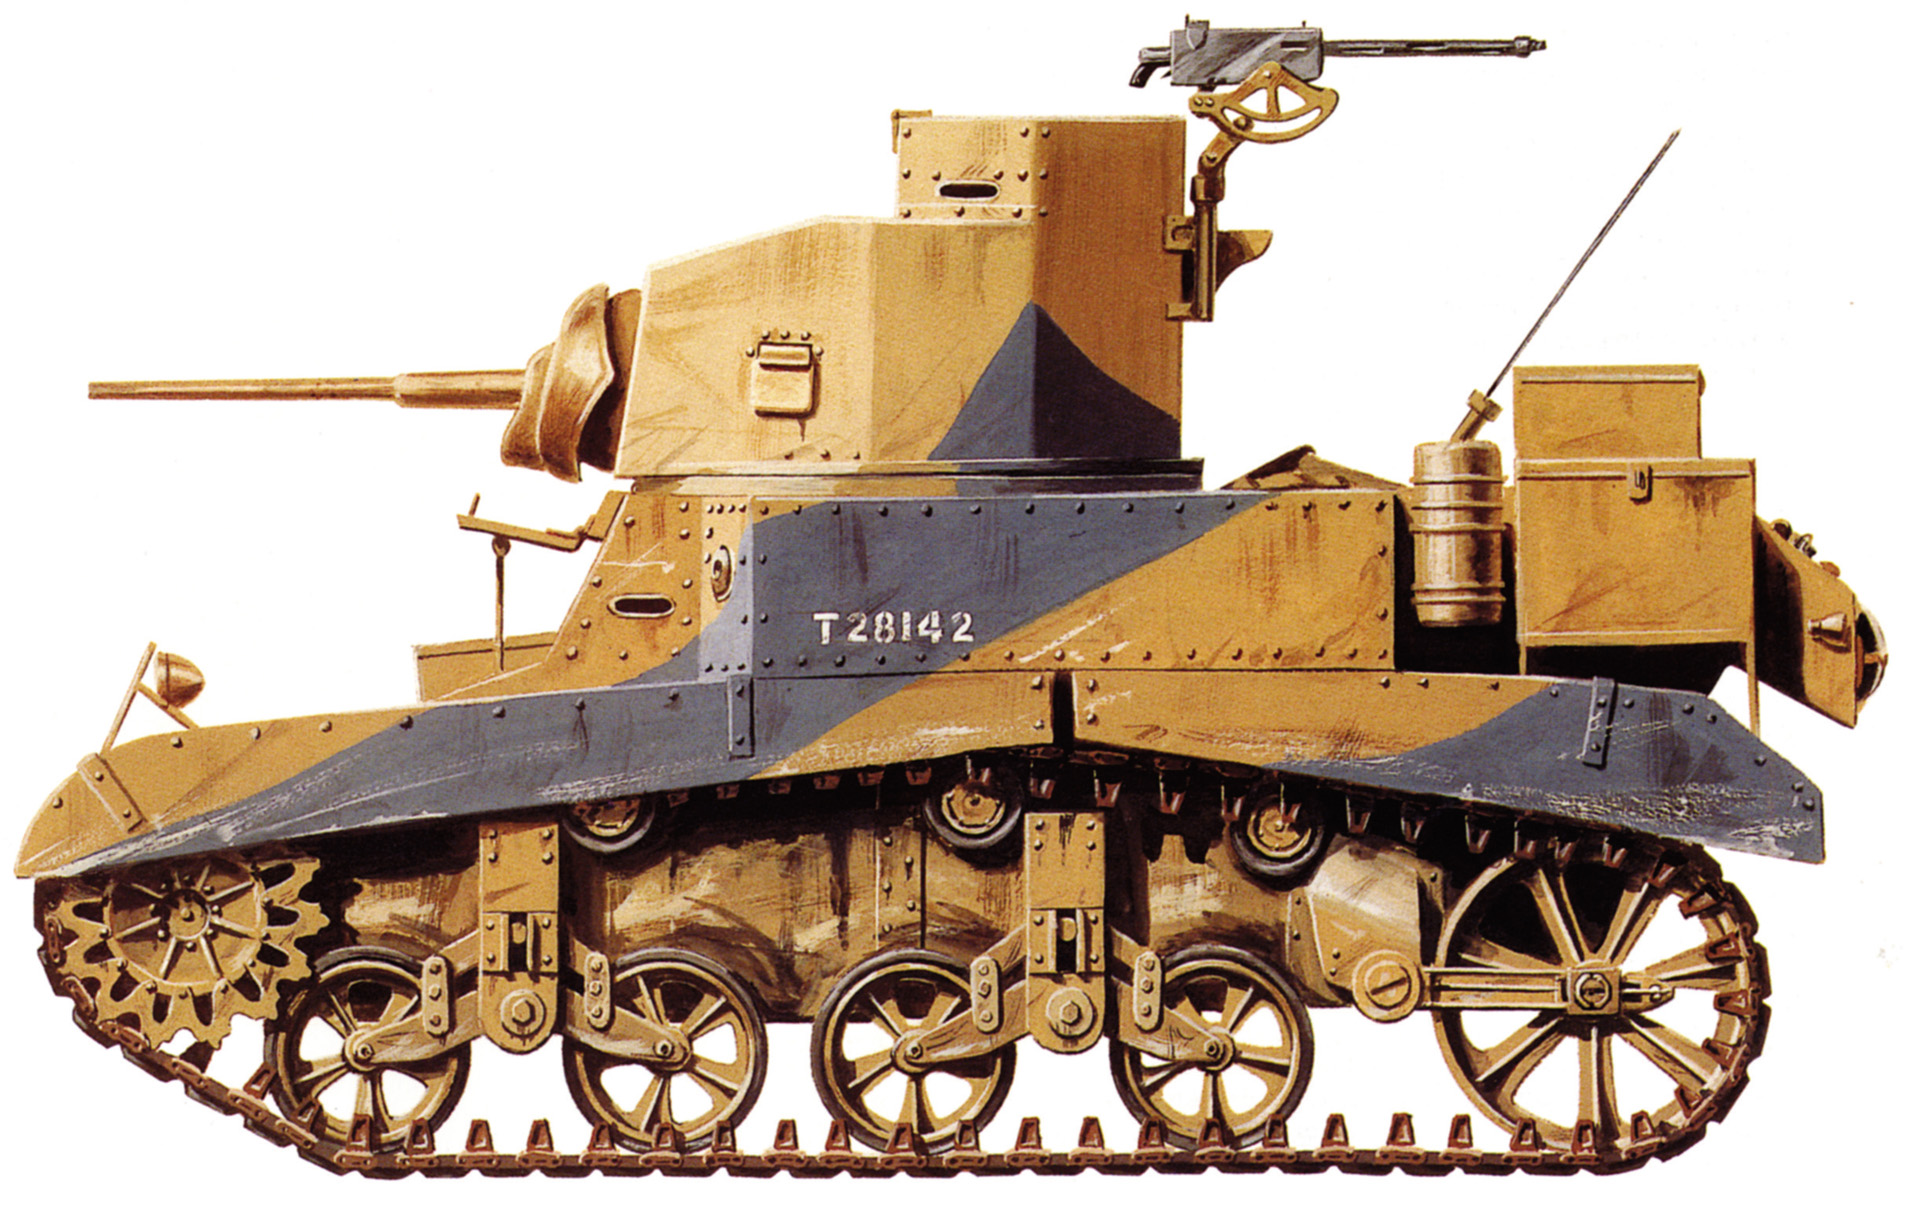 Limited armor and firepower prevented the  M-3 Stuart light tank from engaging German  armor on equal terms. The Stuart was,  however, more successful in the Pacific  against lightly-armored Japanese tanks.